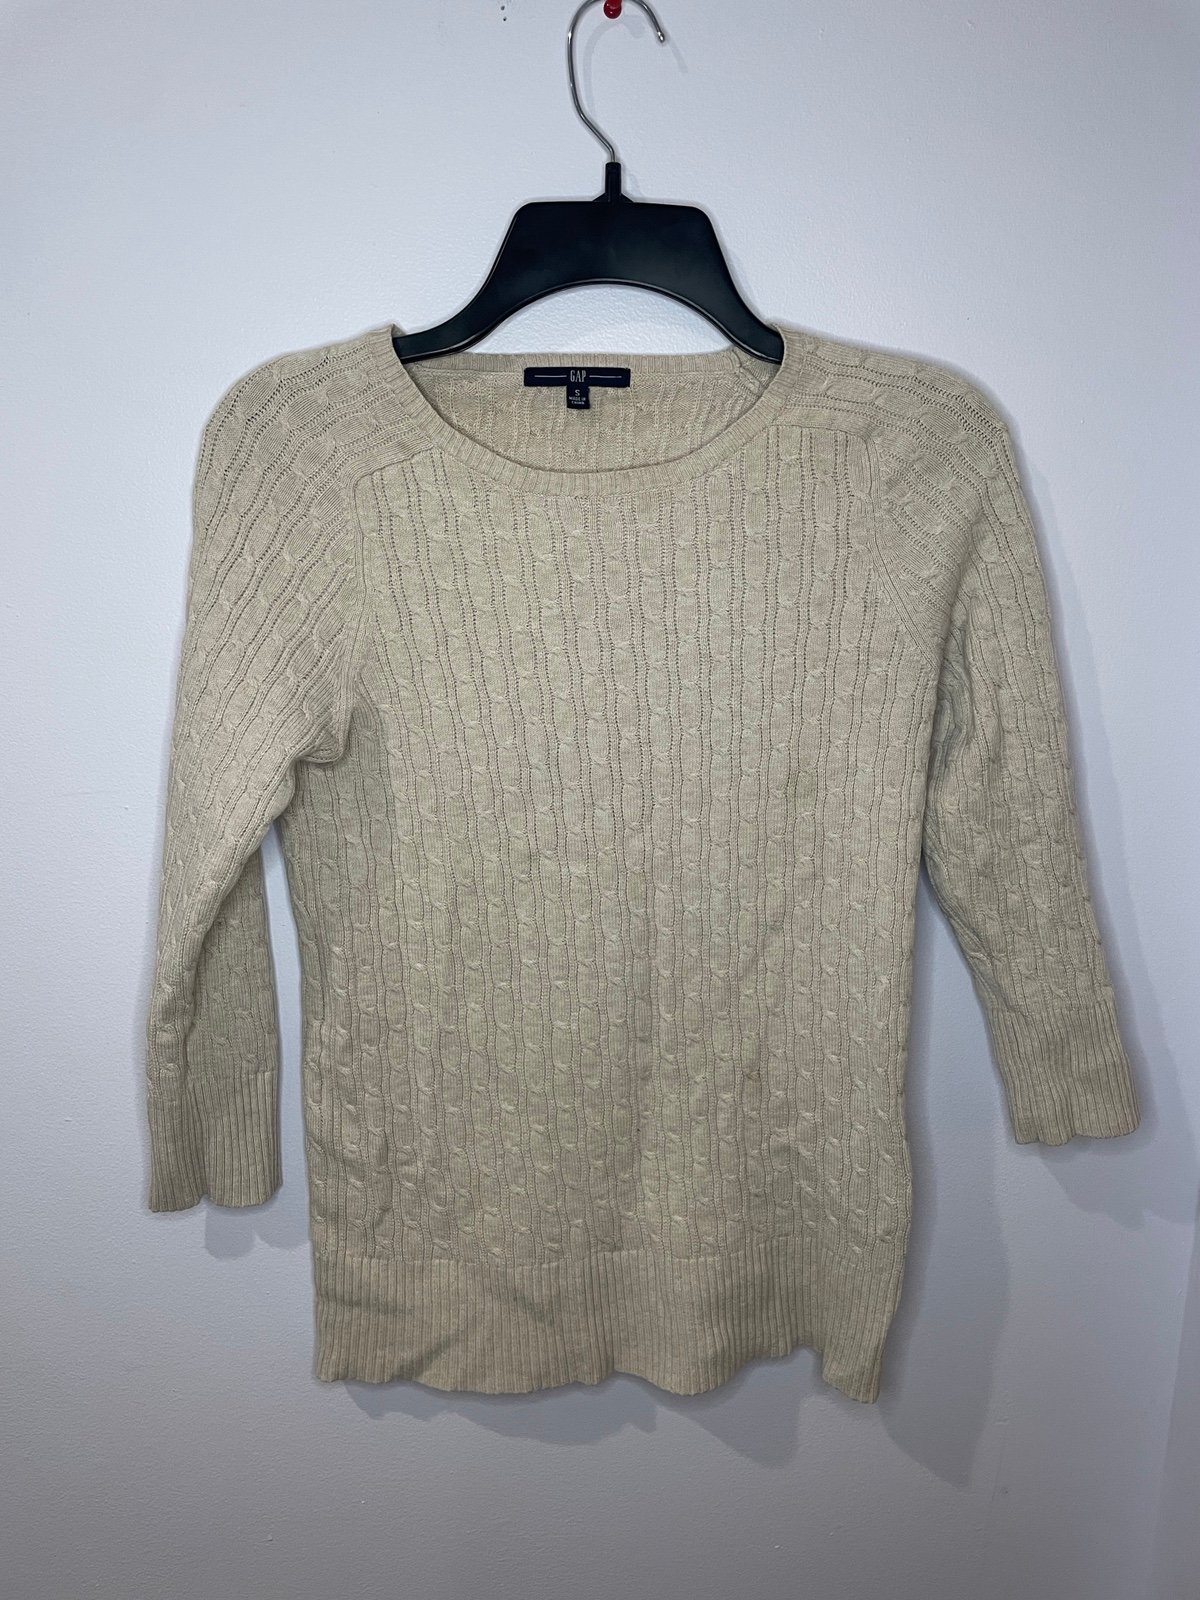 Classic GAP sweater MQ2Cpe9SF Outlet Store